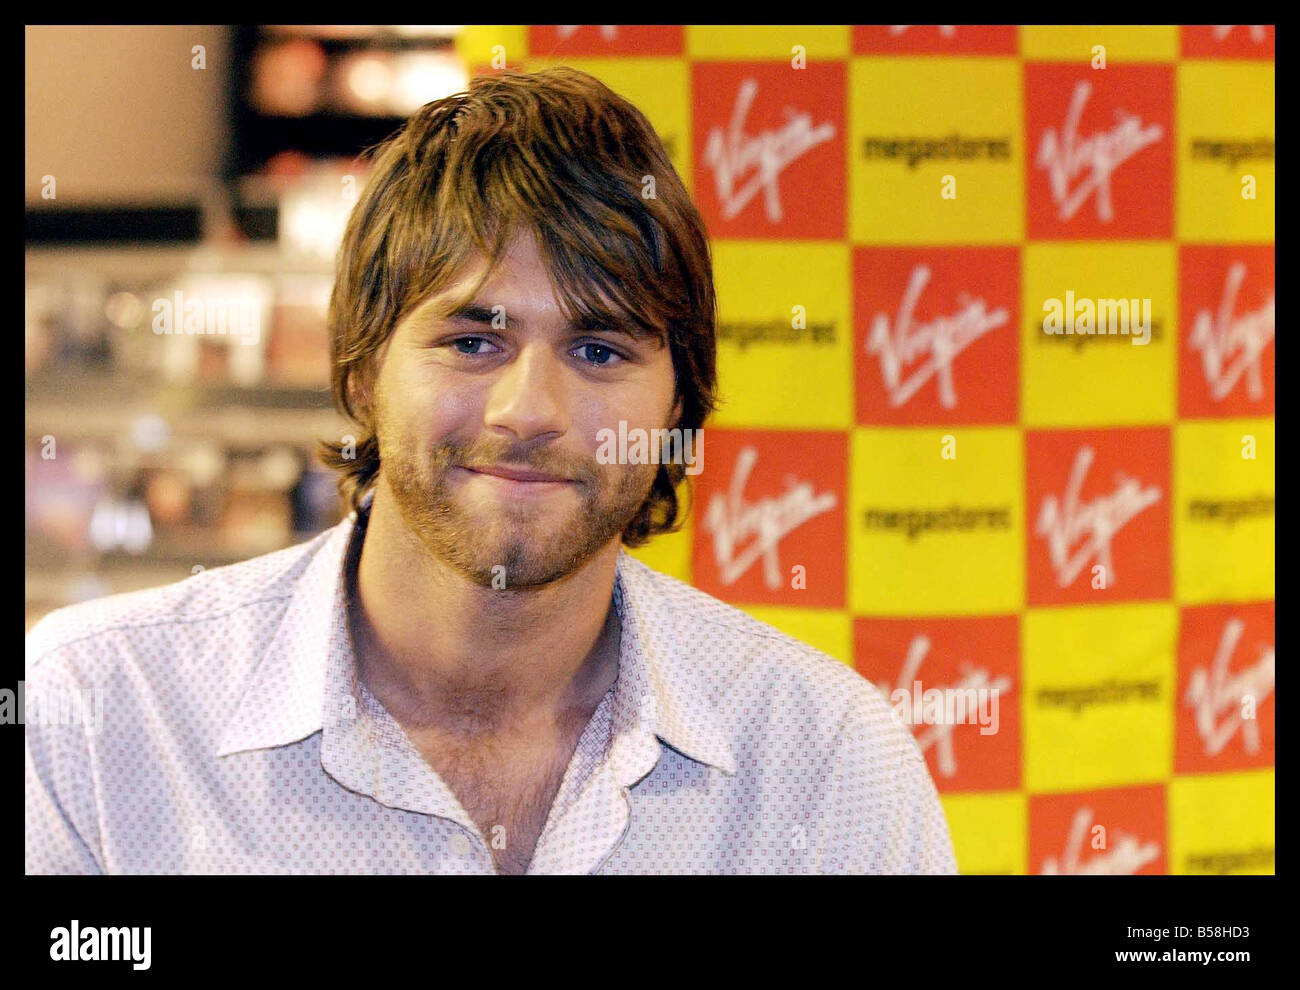 Brian McFadden ex Westlife singer signed autographs for fans today as he launched his new single at Virgin Megastore in city Stock Photo